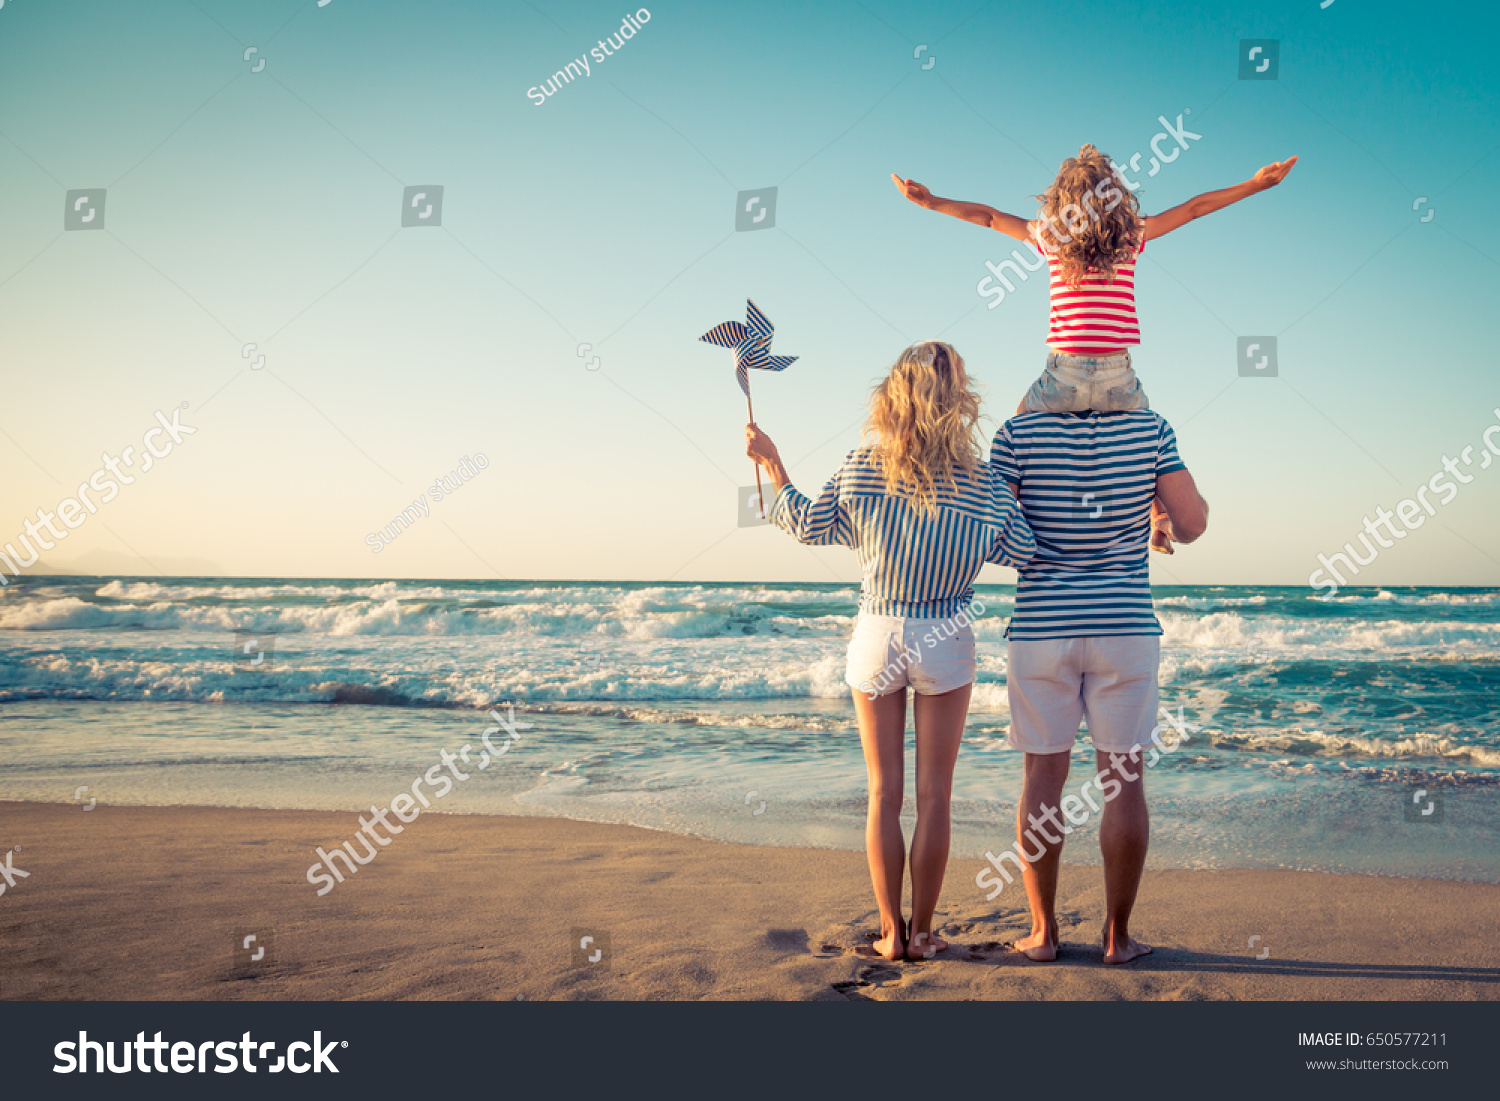 Happy family on the beach. People having fun on summer vacation. Father, mother and child against blue sea and sky background. Holiday travel concept #650577211